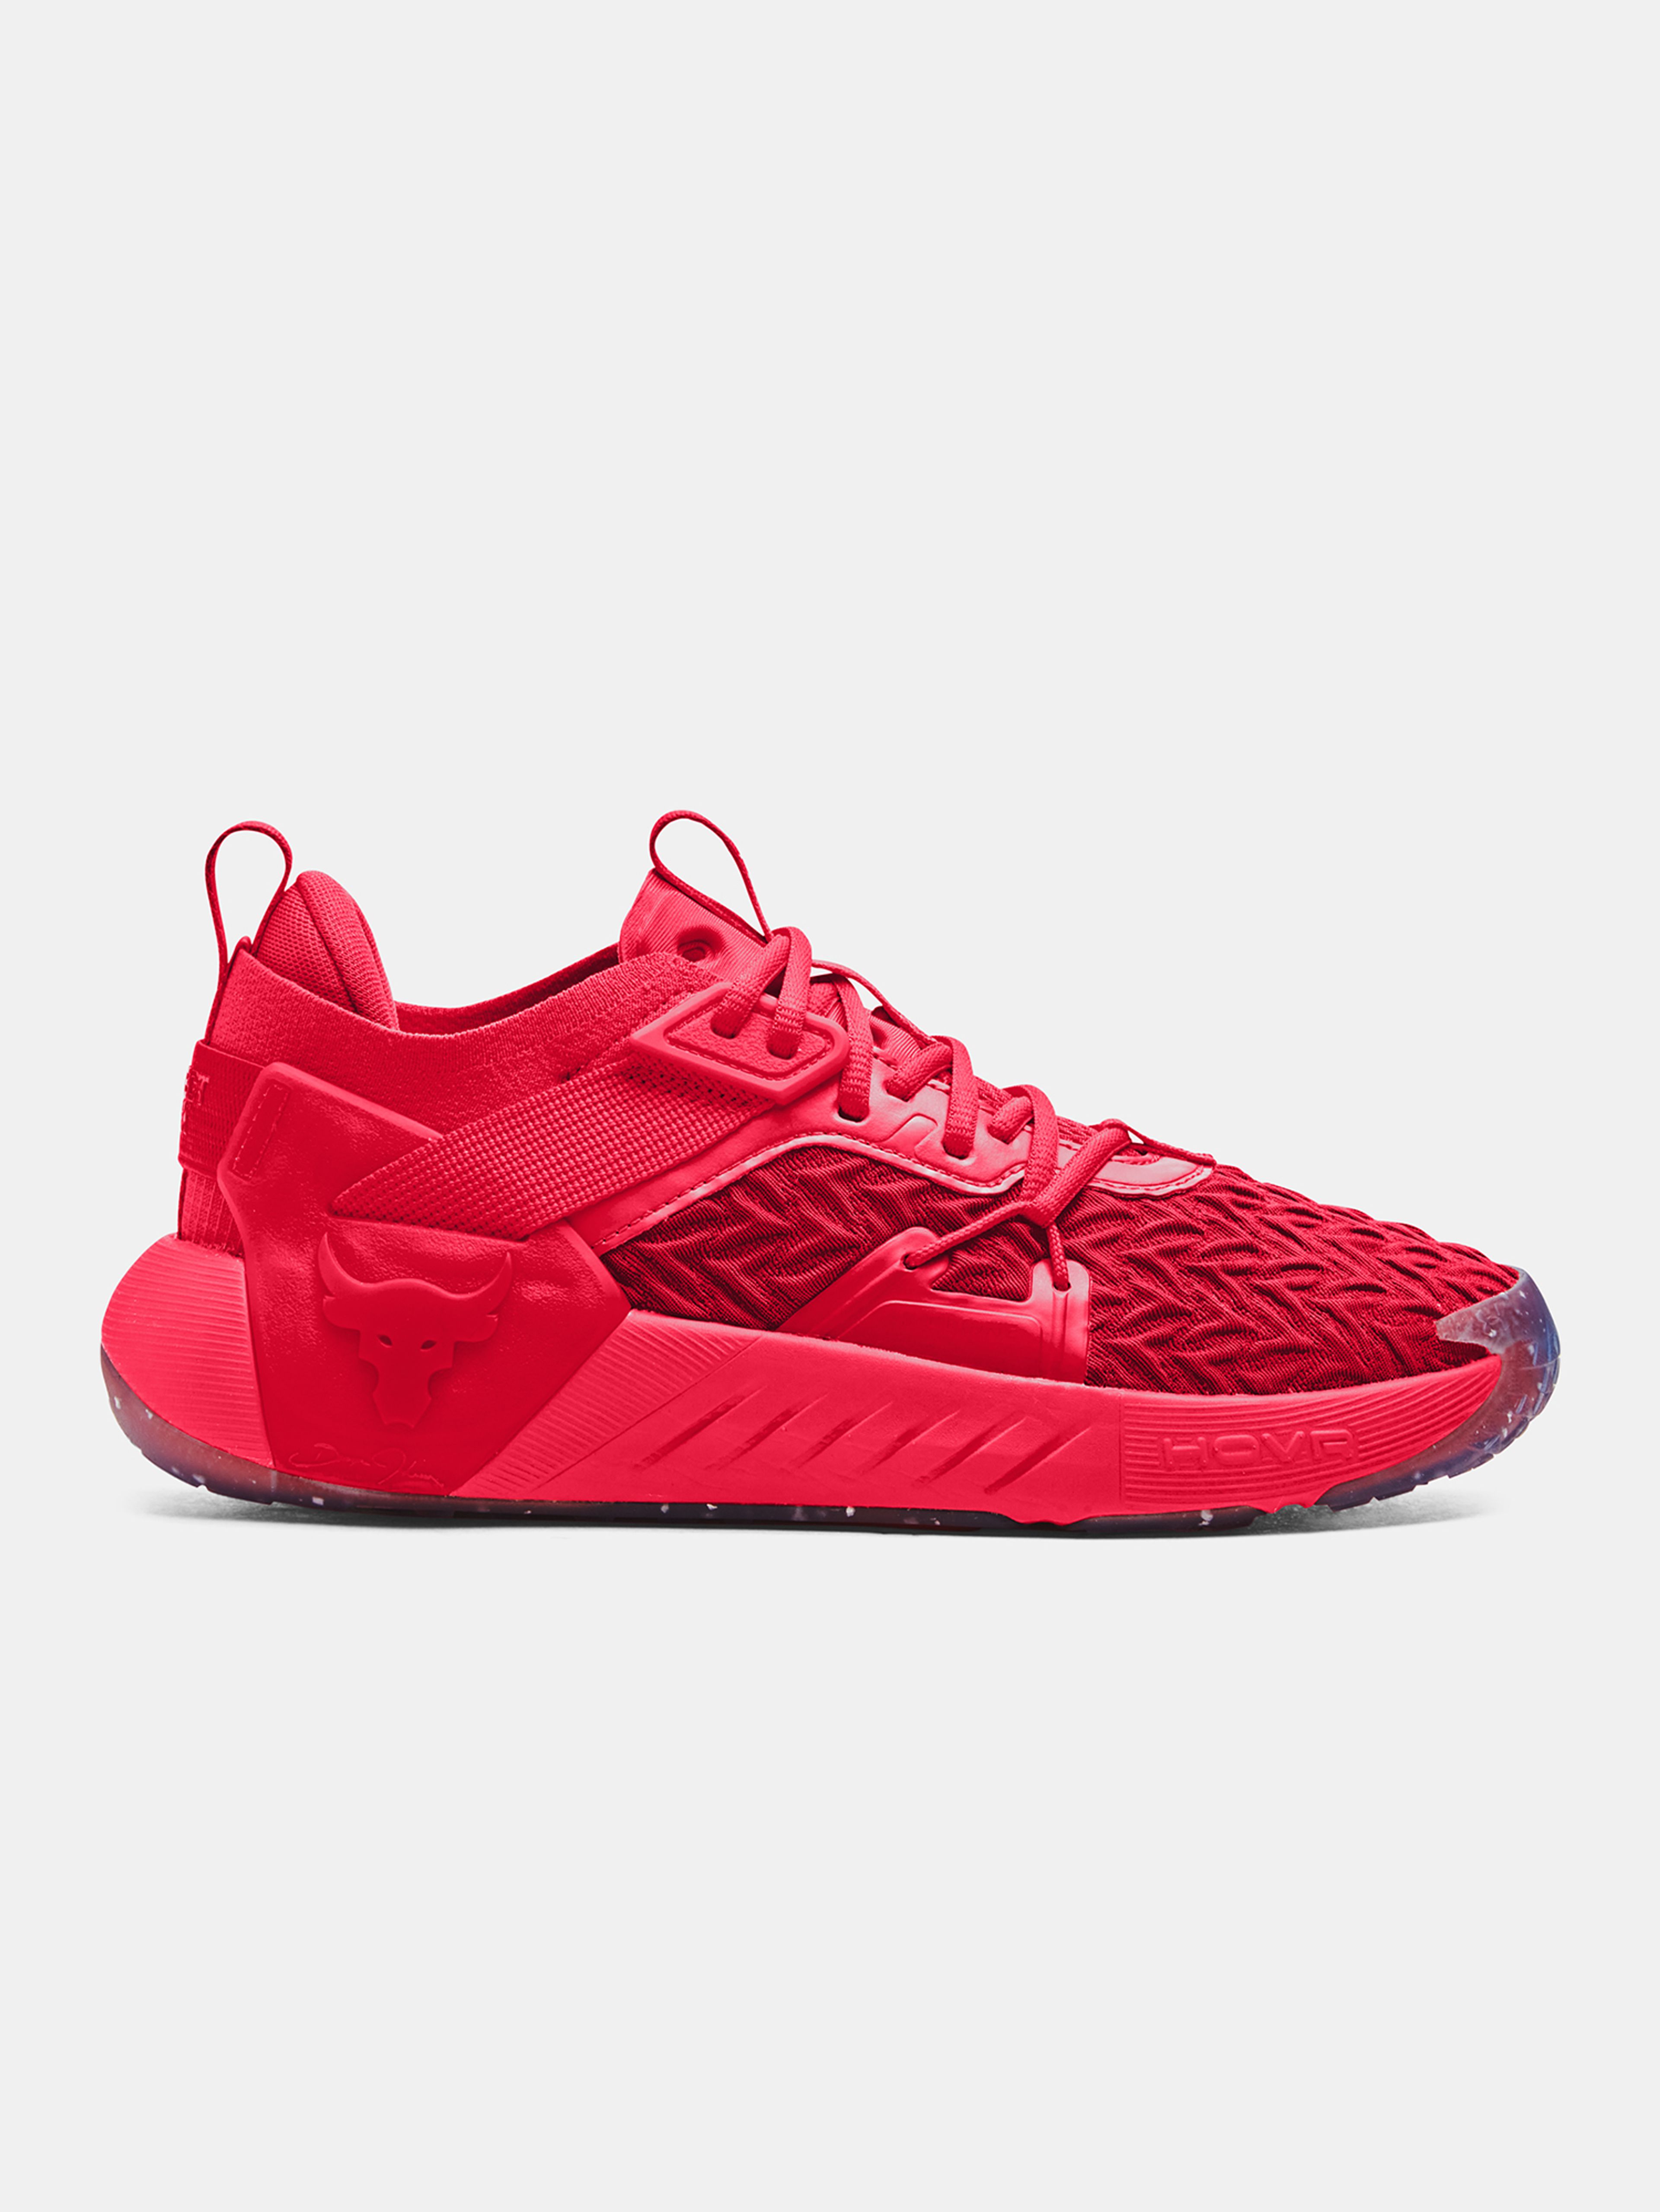 Under Armour UA Project Rock 6 Holiday-RED cipők